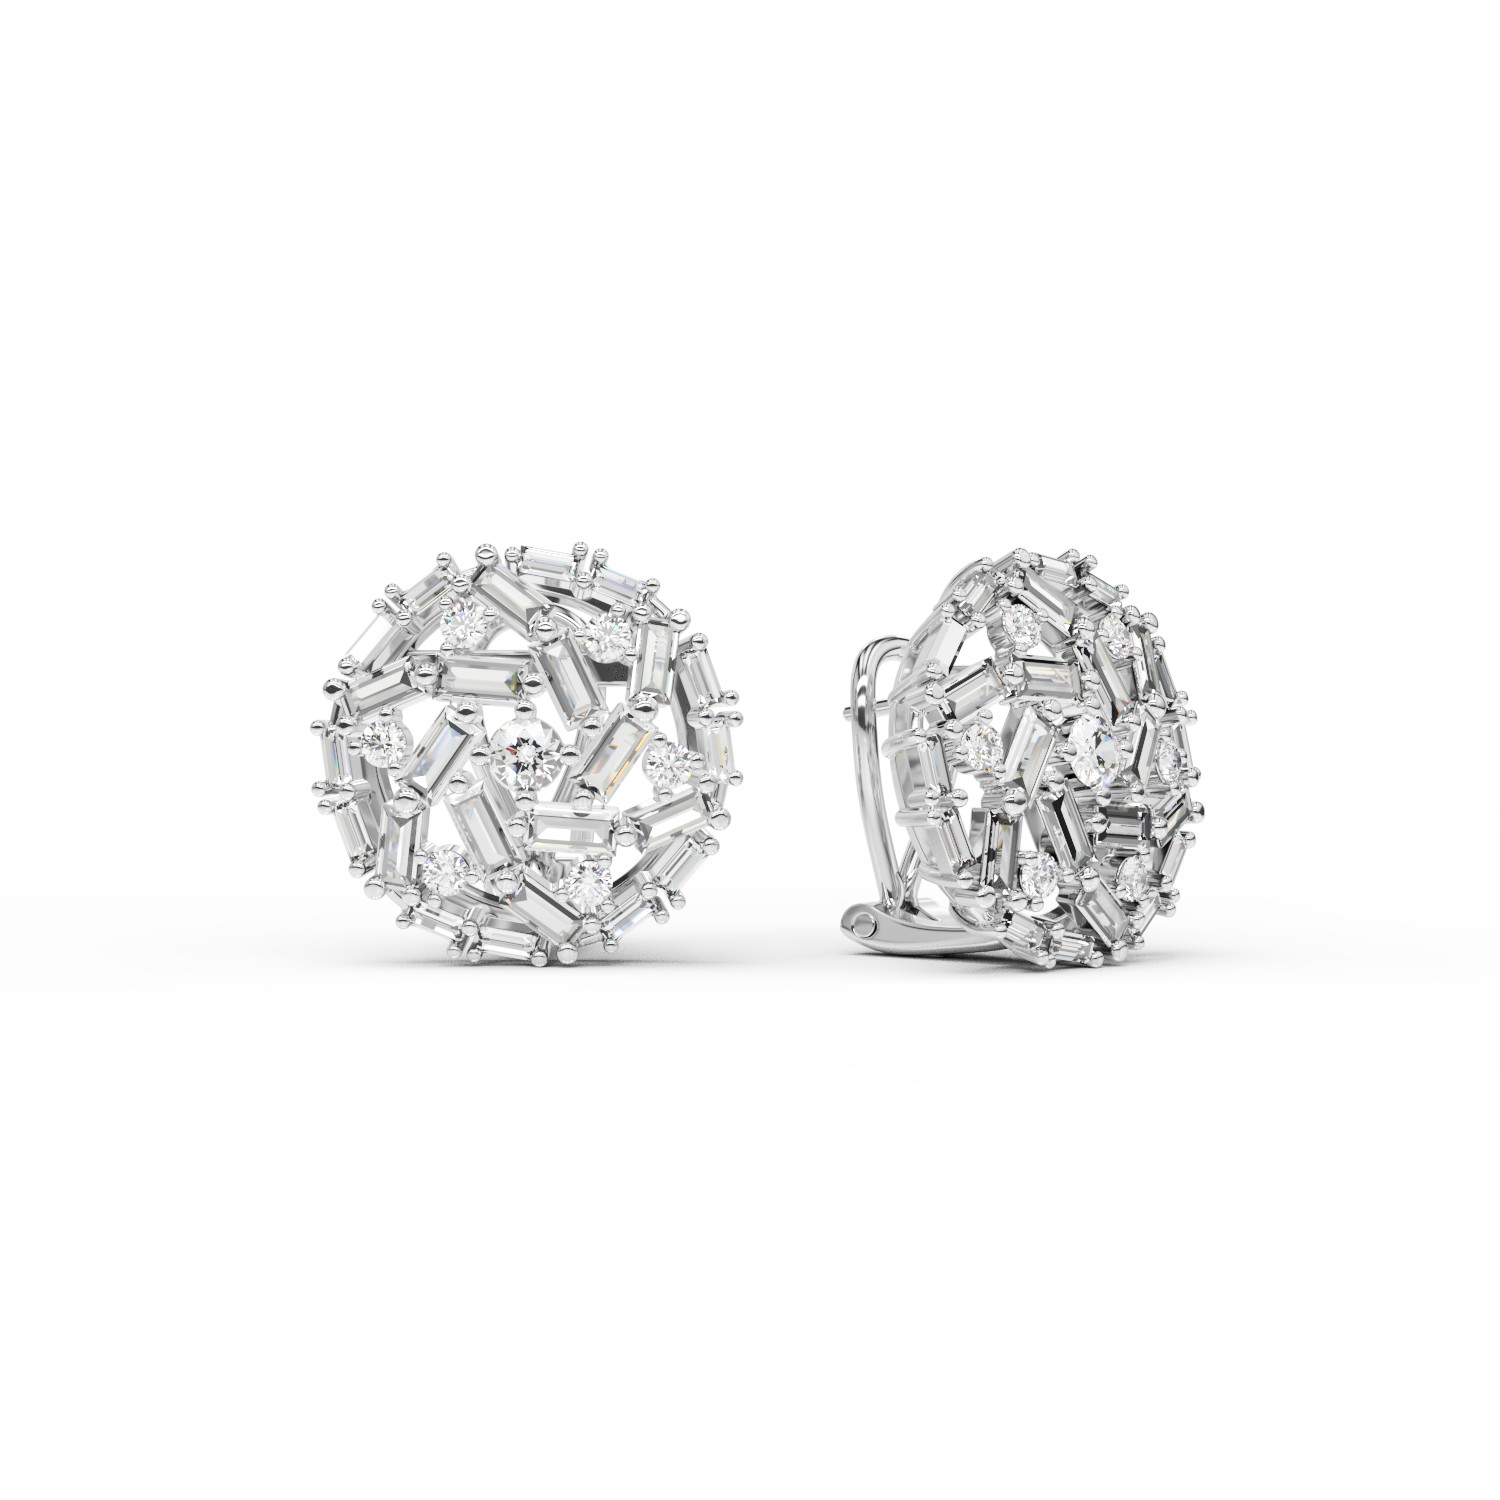 18K white gold earrings with 2.18ct diamonds